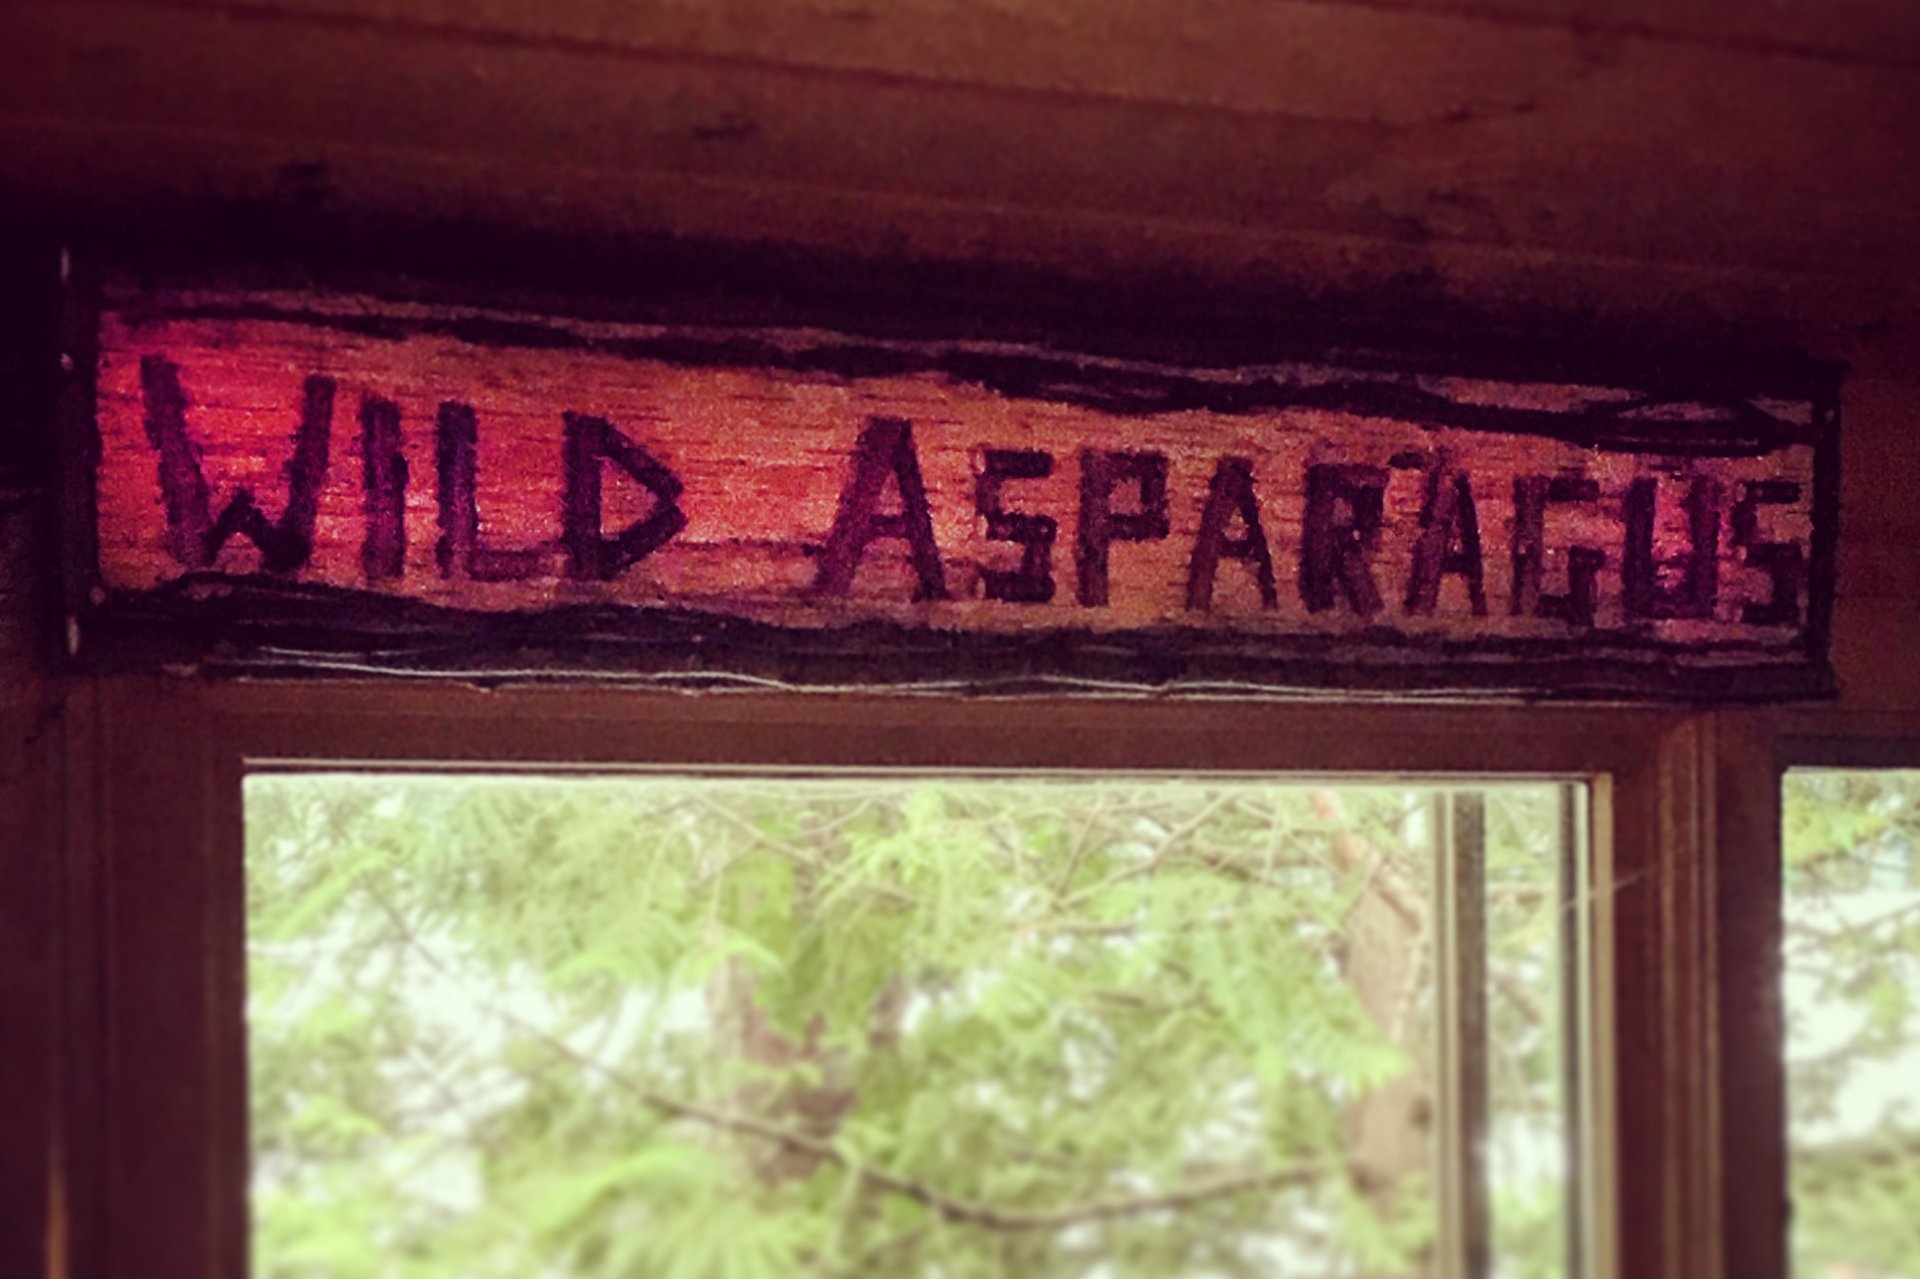 Window with Wild Asparagus sign above it